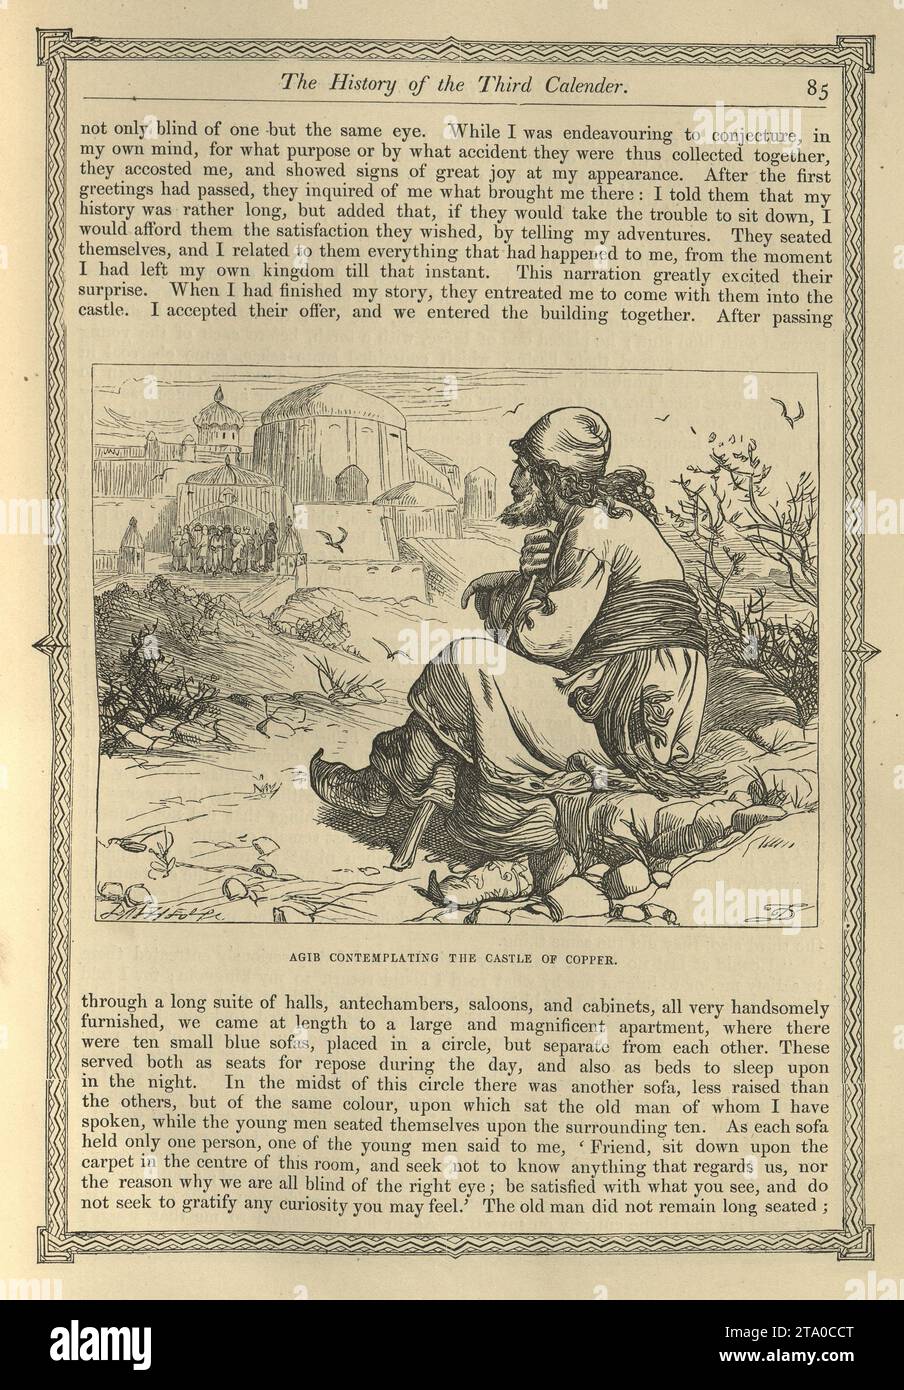 Vintage illustration One Thousand and One Nights, Agib contemplating the Castle of Copper, Arabian, Middle Eastern folktales, by The Brothers Dalziel. The Story of the Third Calender Stock Photo